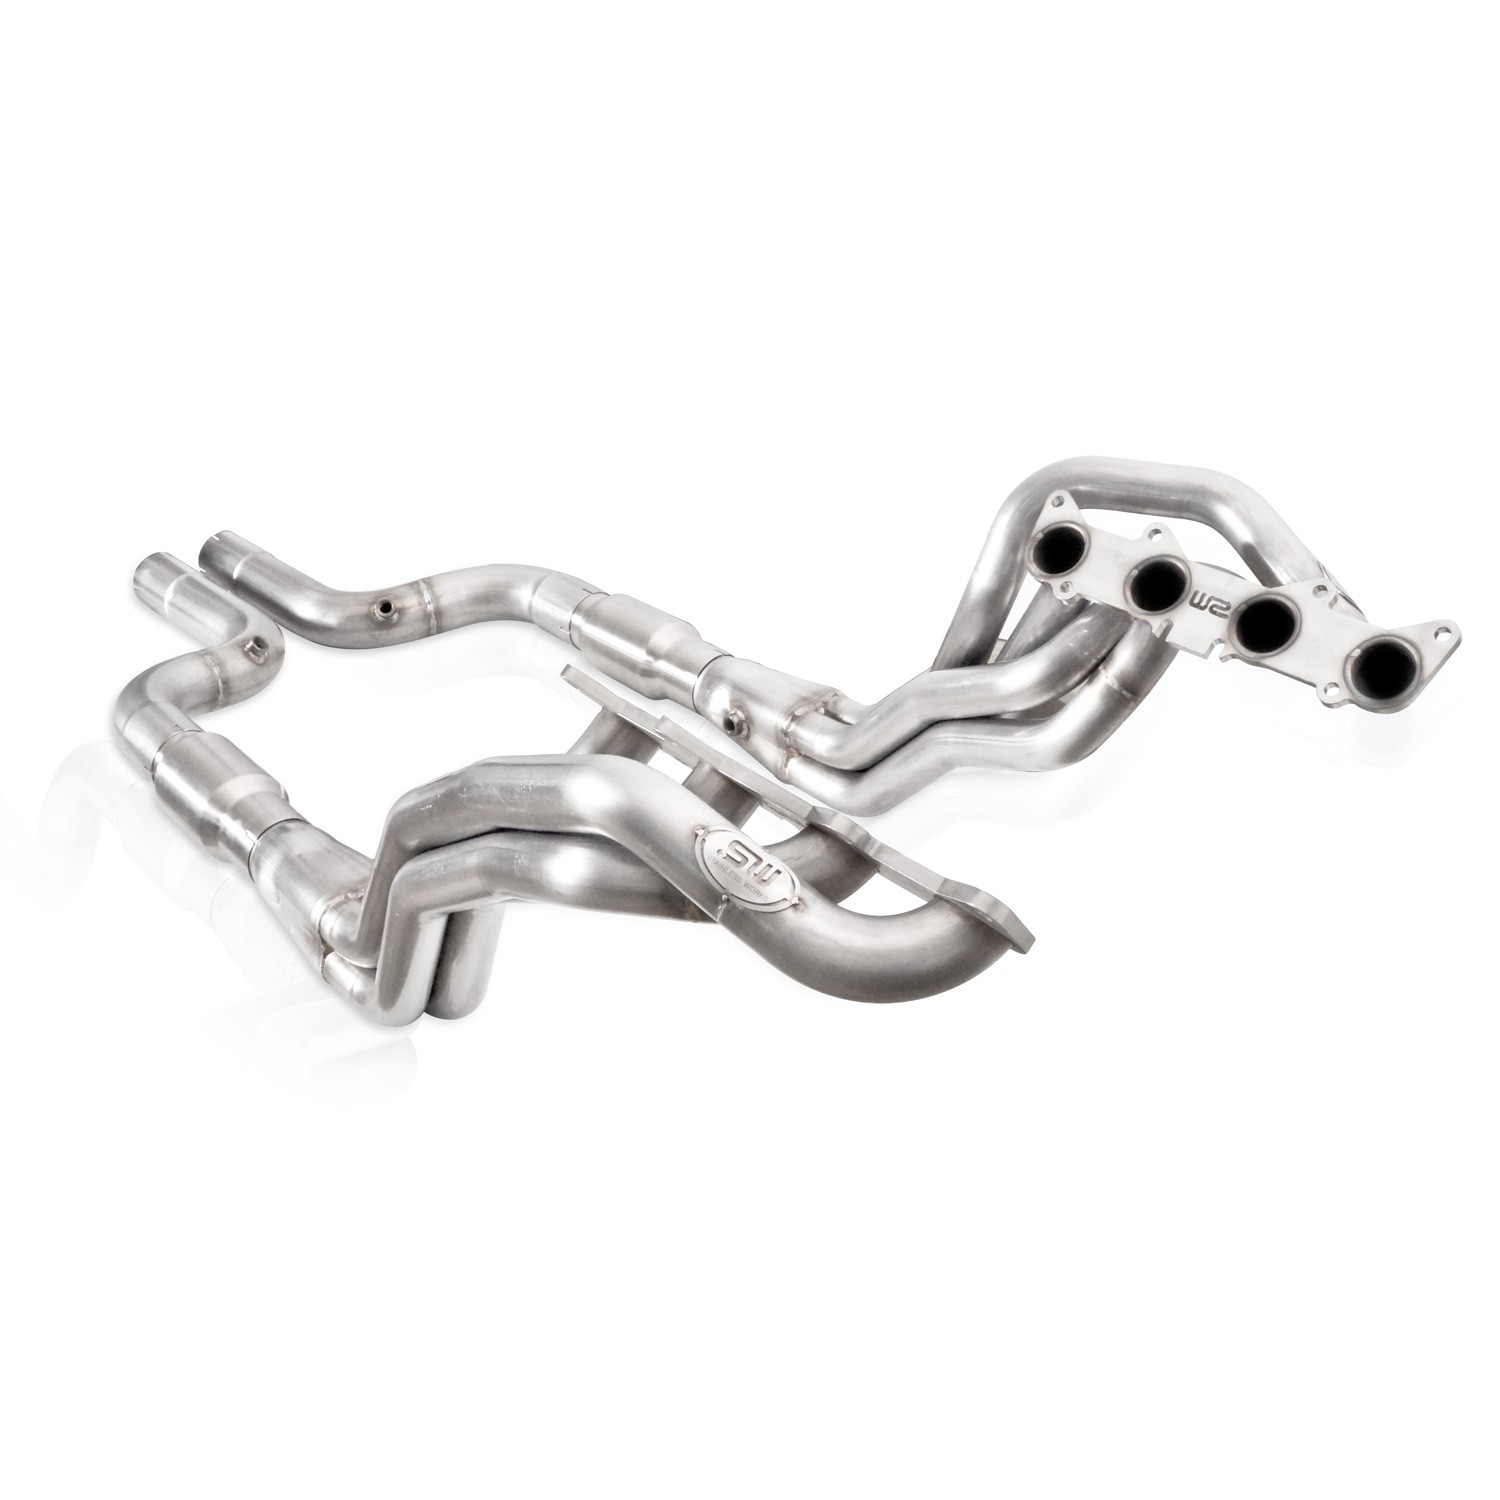 2015-2021 Mustang GT 5.0L SW Headers 2" With Catted Leads Aftermarket Connect